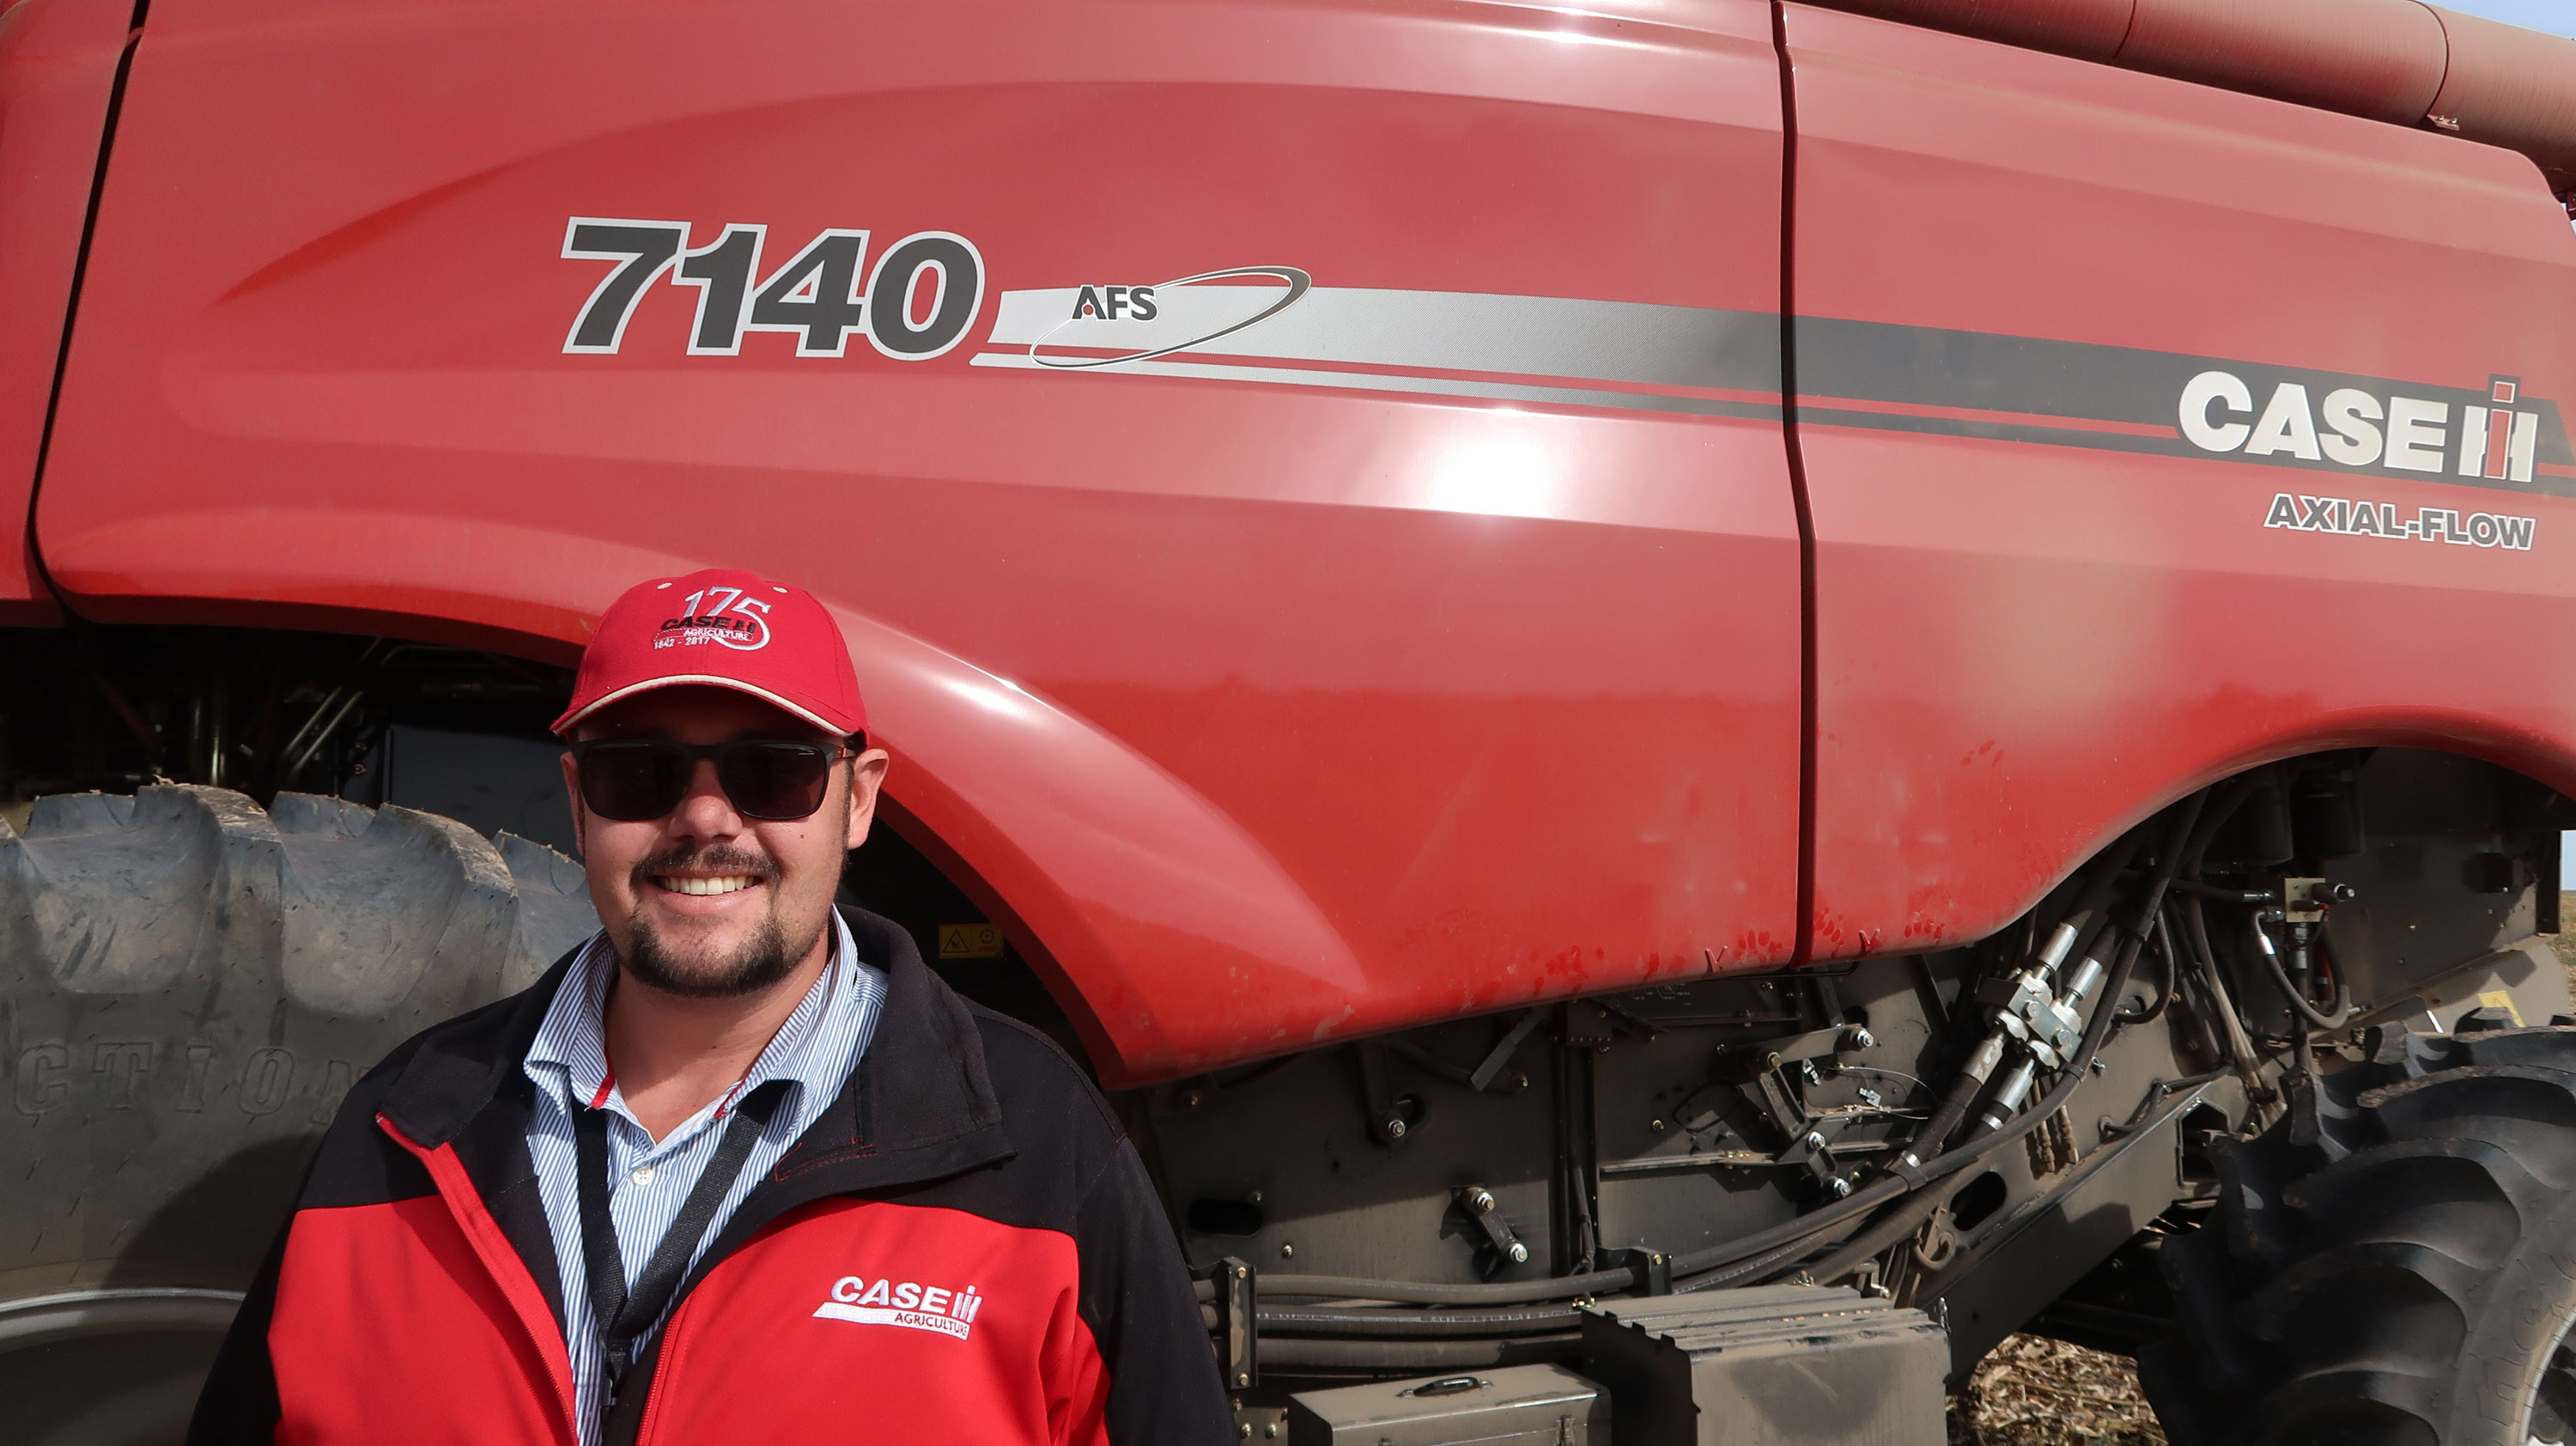 CASE IH PROVIDES HANDS-ON SALES TRAINING OPPORTUNITY